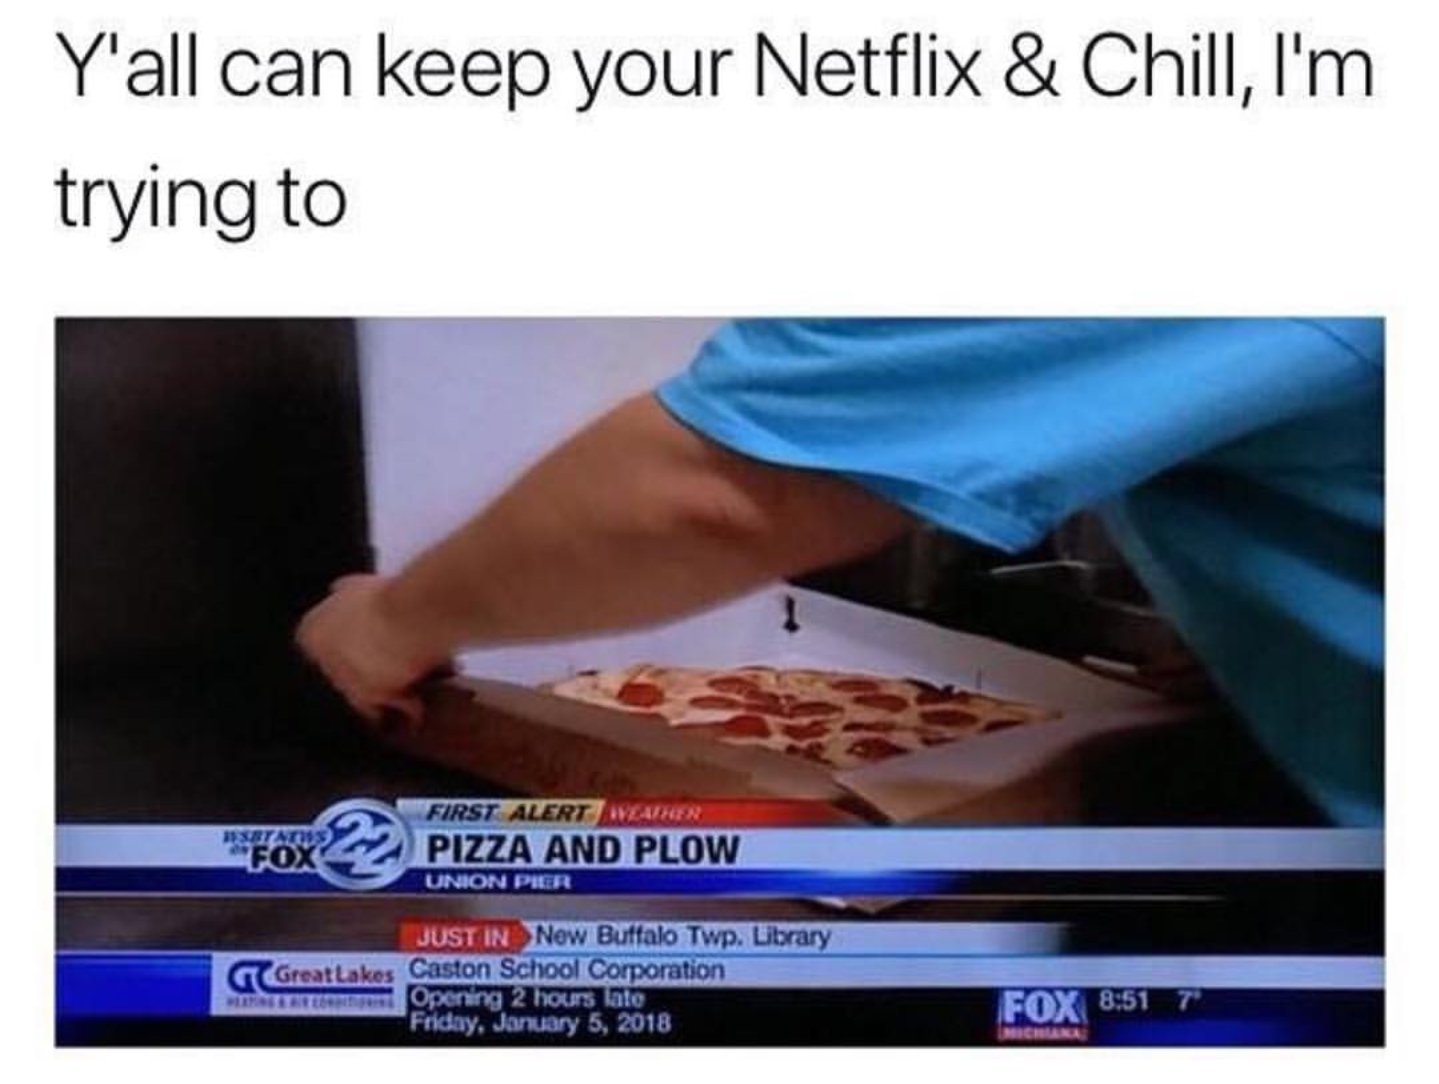 netflix meme - Y'all can keep your Netflix & Chill, I'm trying to First Alerter Pizza And Plow Canon Per Just In Now Buffalo Twp. Library Great Lakes Caston School Corporation . Opening 2 hours late Friday, Fox 7